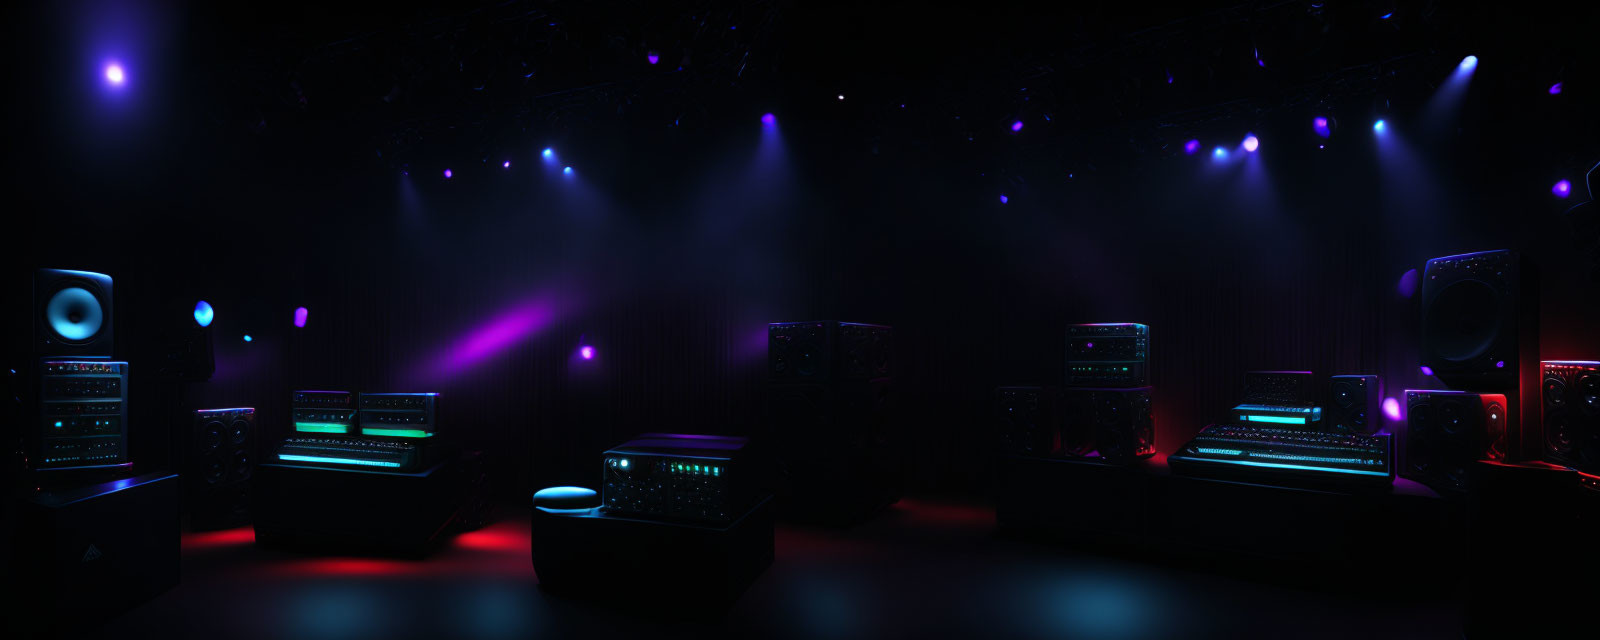 Dimly lit music studio with blue and purple stage lights, electronic equipment, and speakers.